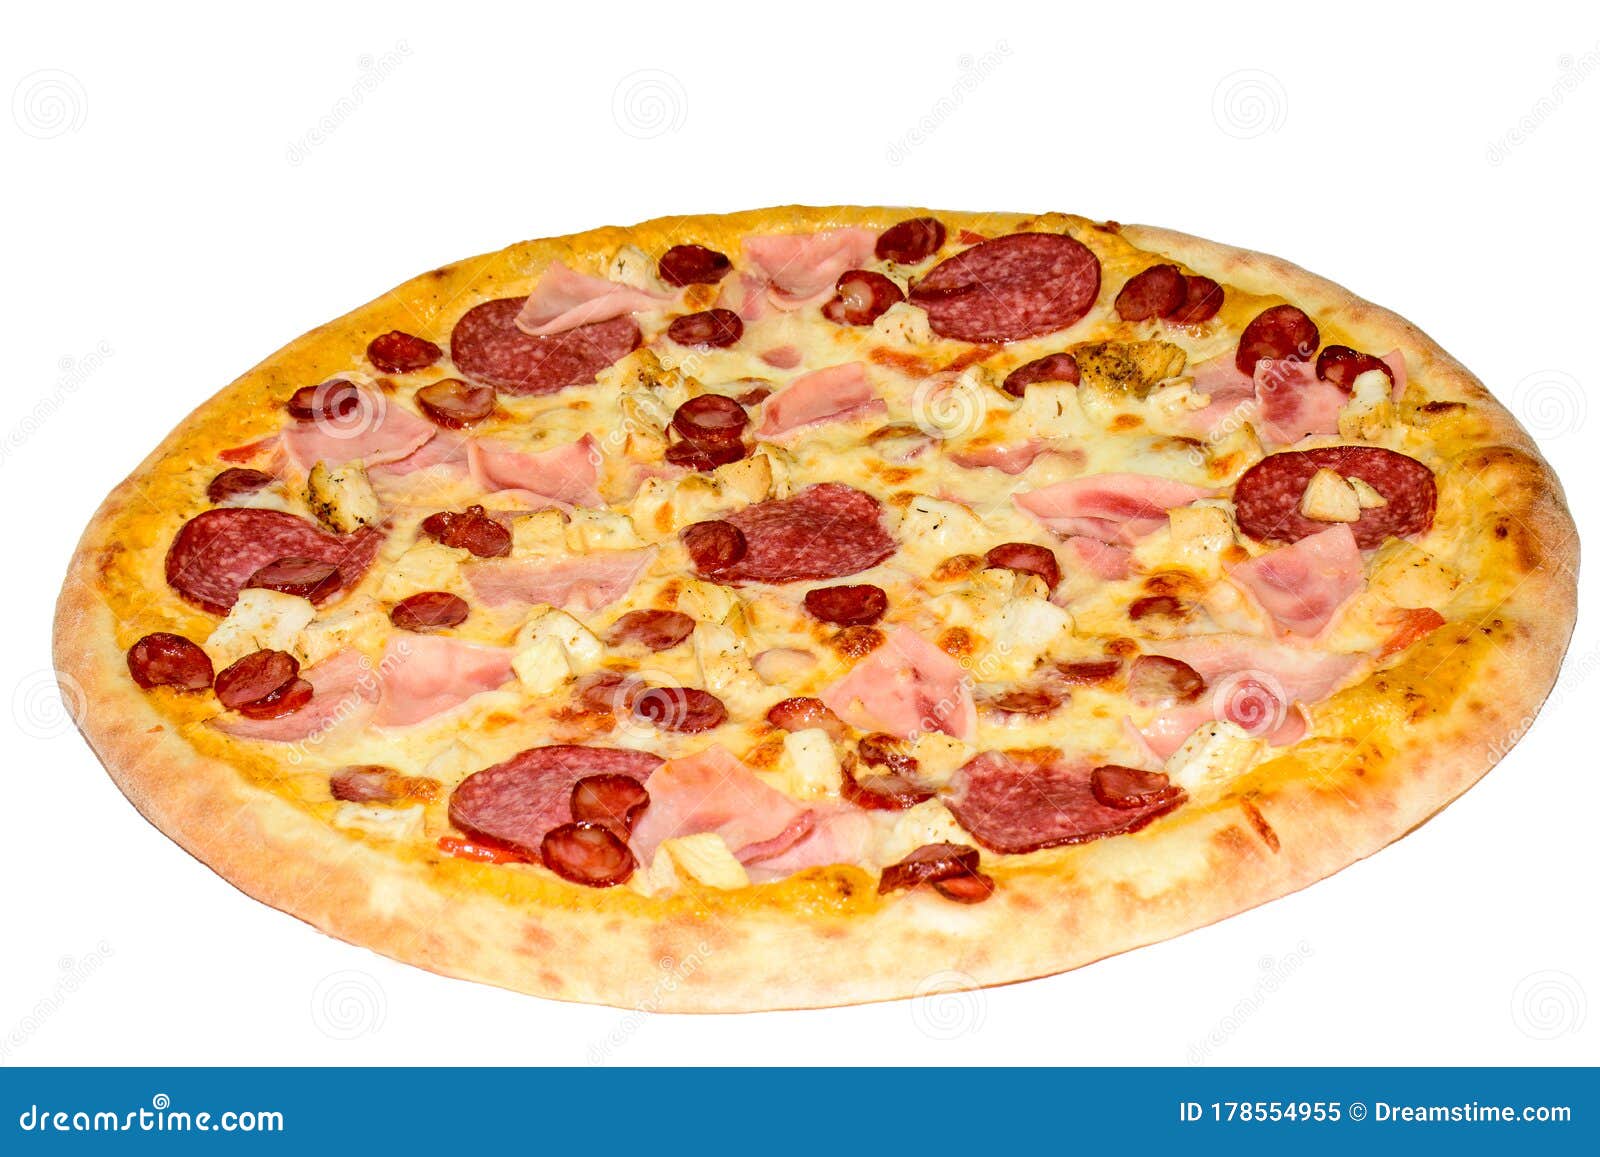 Pizza with Cheese View from an Angle Stock Image - Image of mushrooms ...